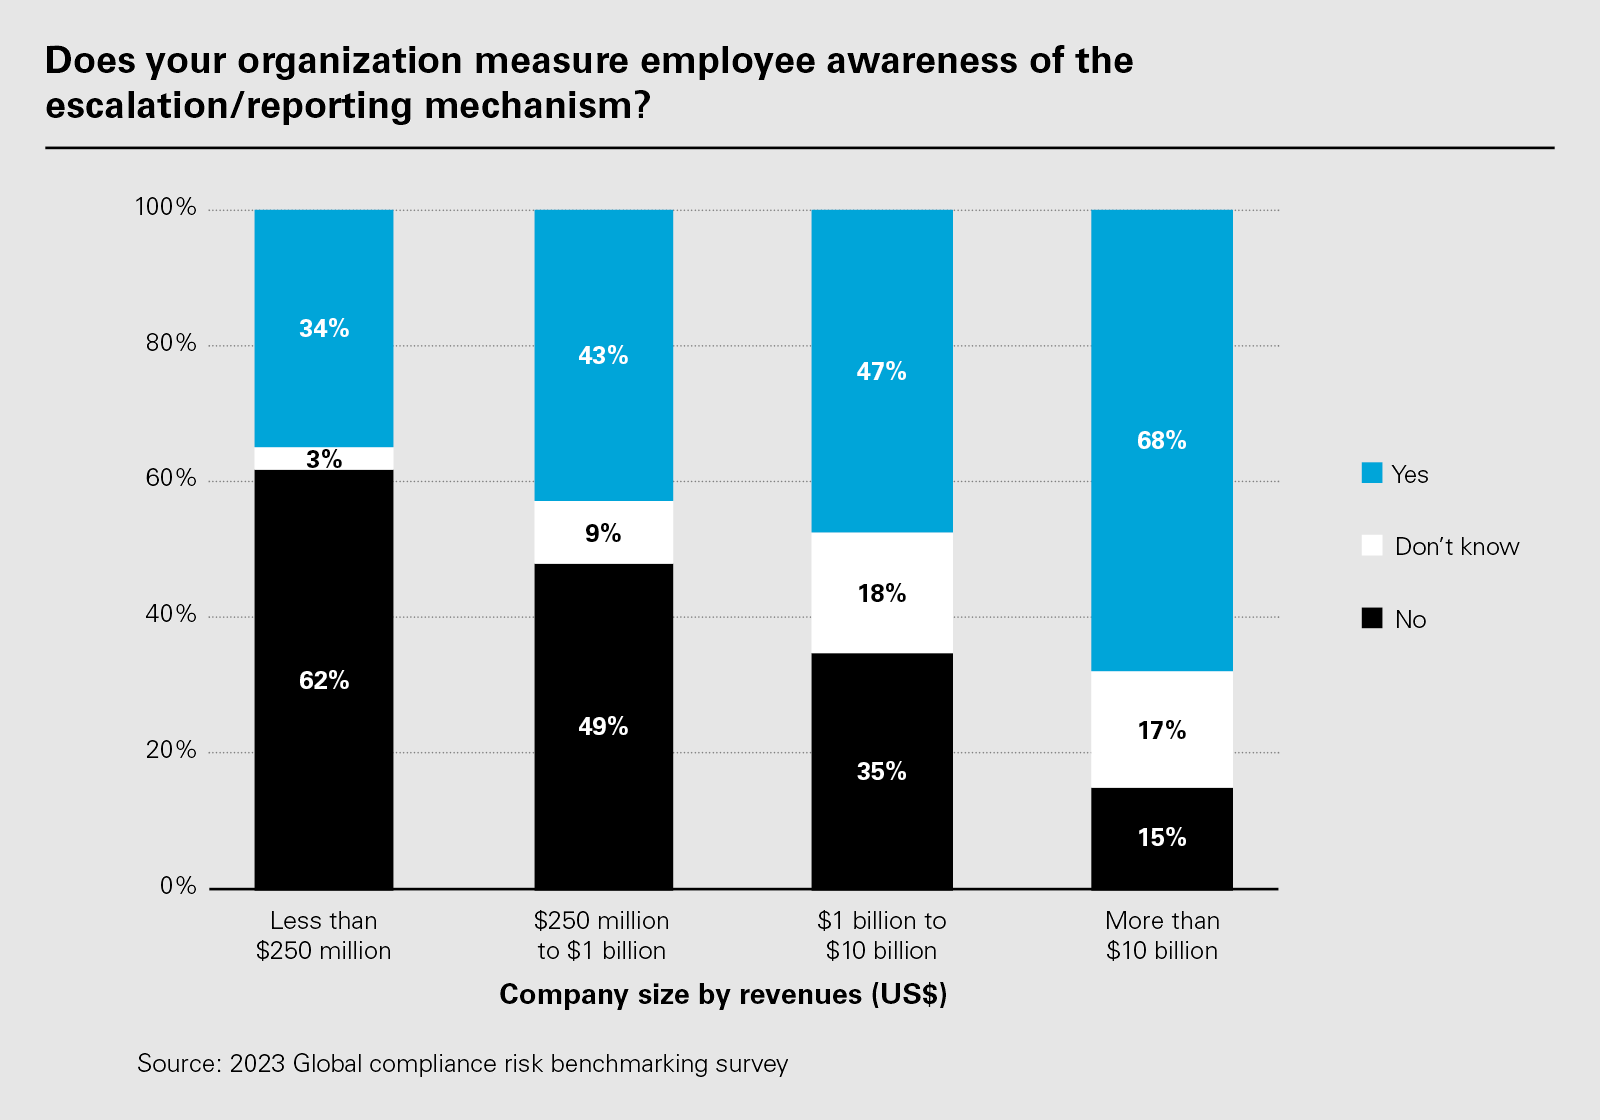 Does your organization measure employee awareness of the escalation/reporting mechanism?